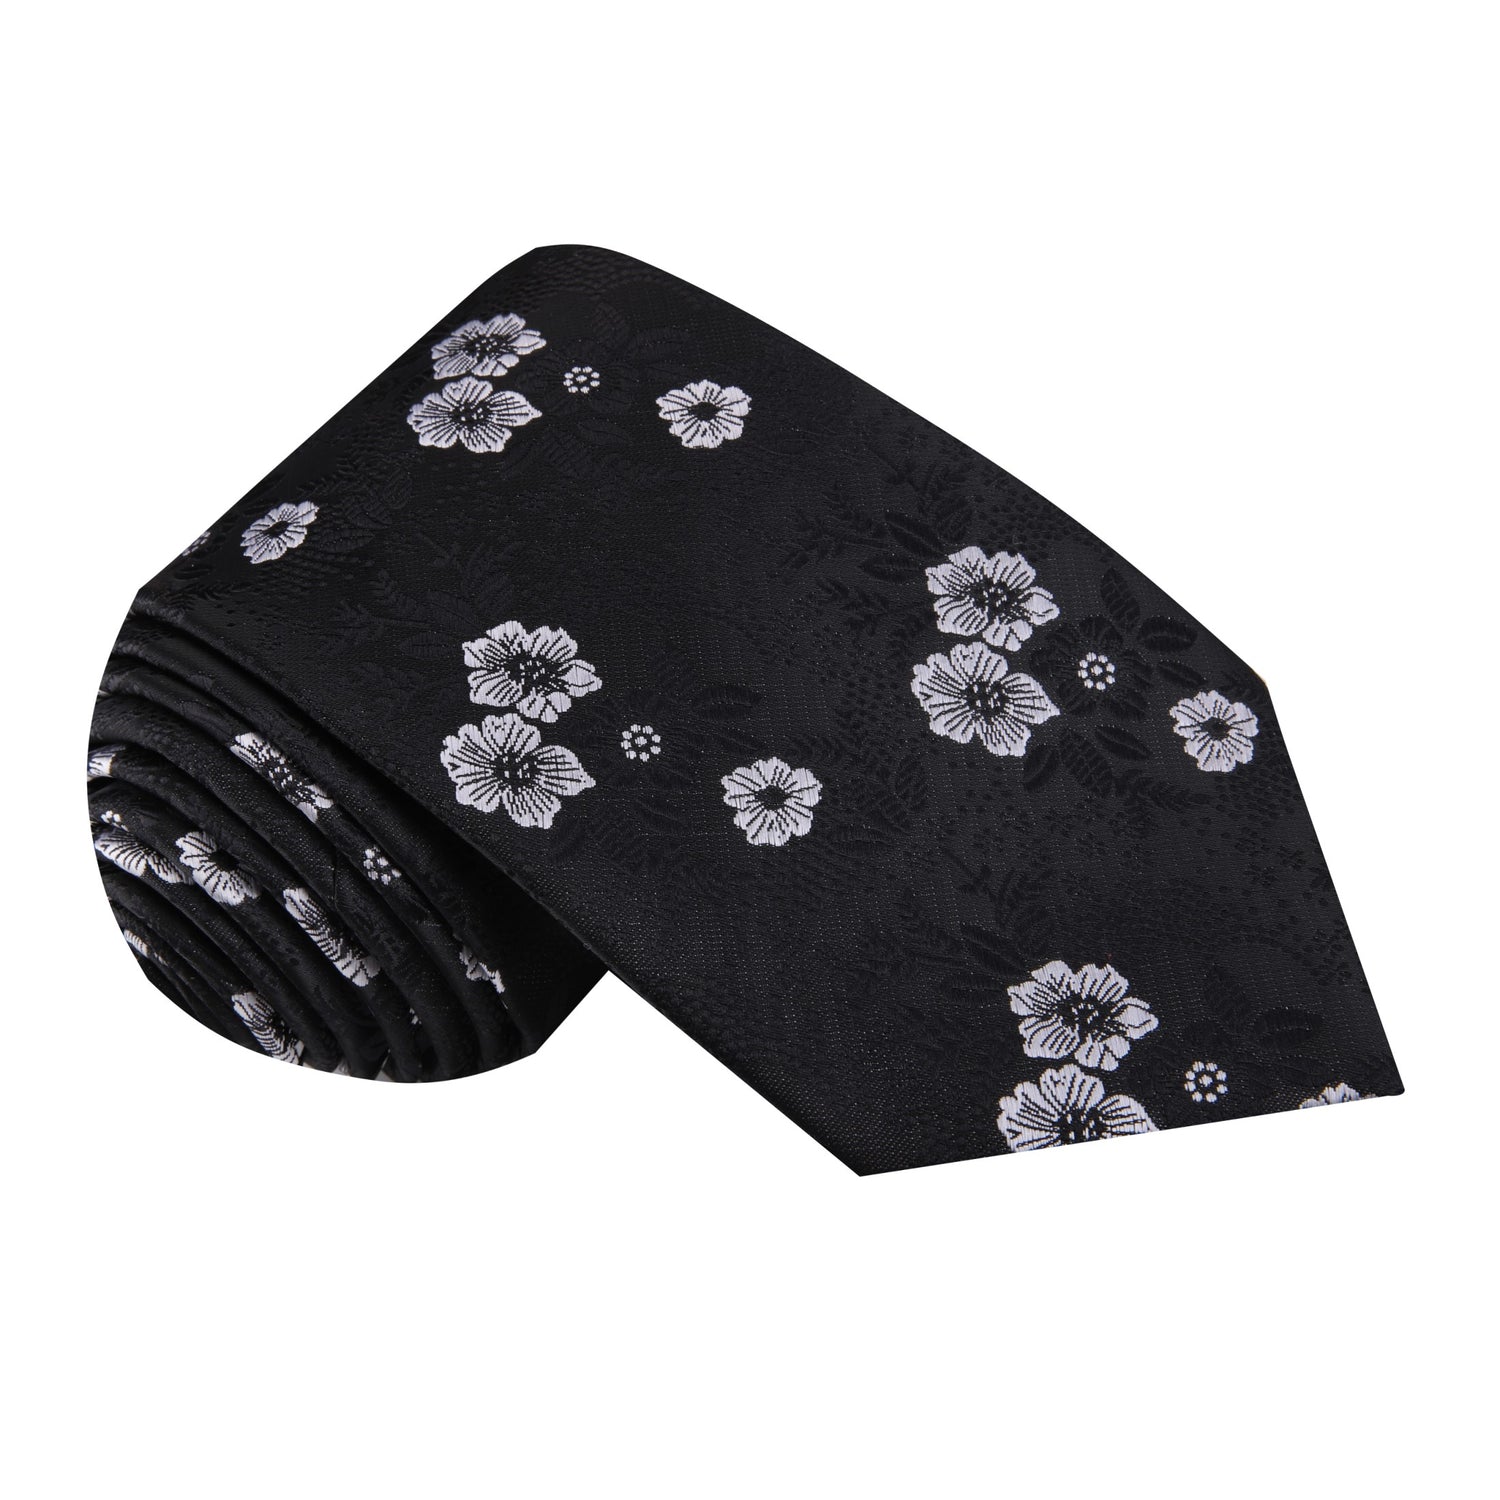 Black and White Floral Tie